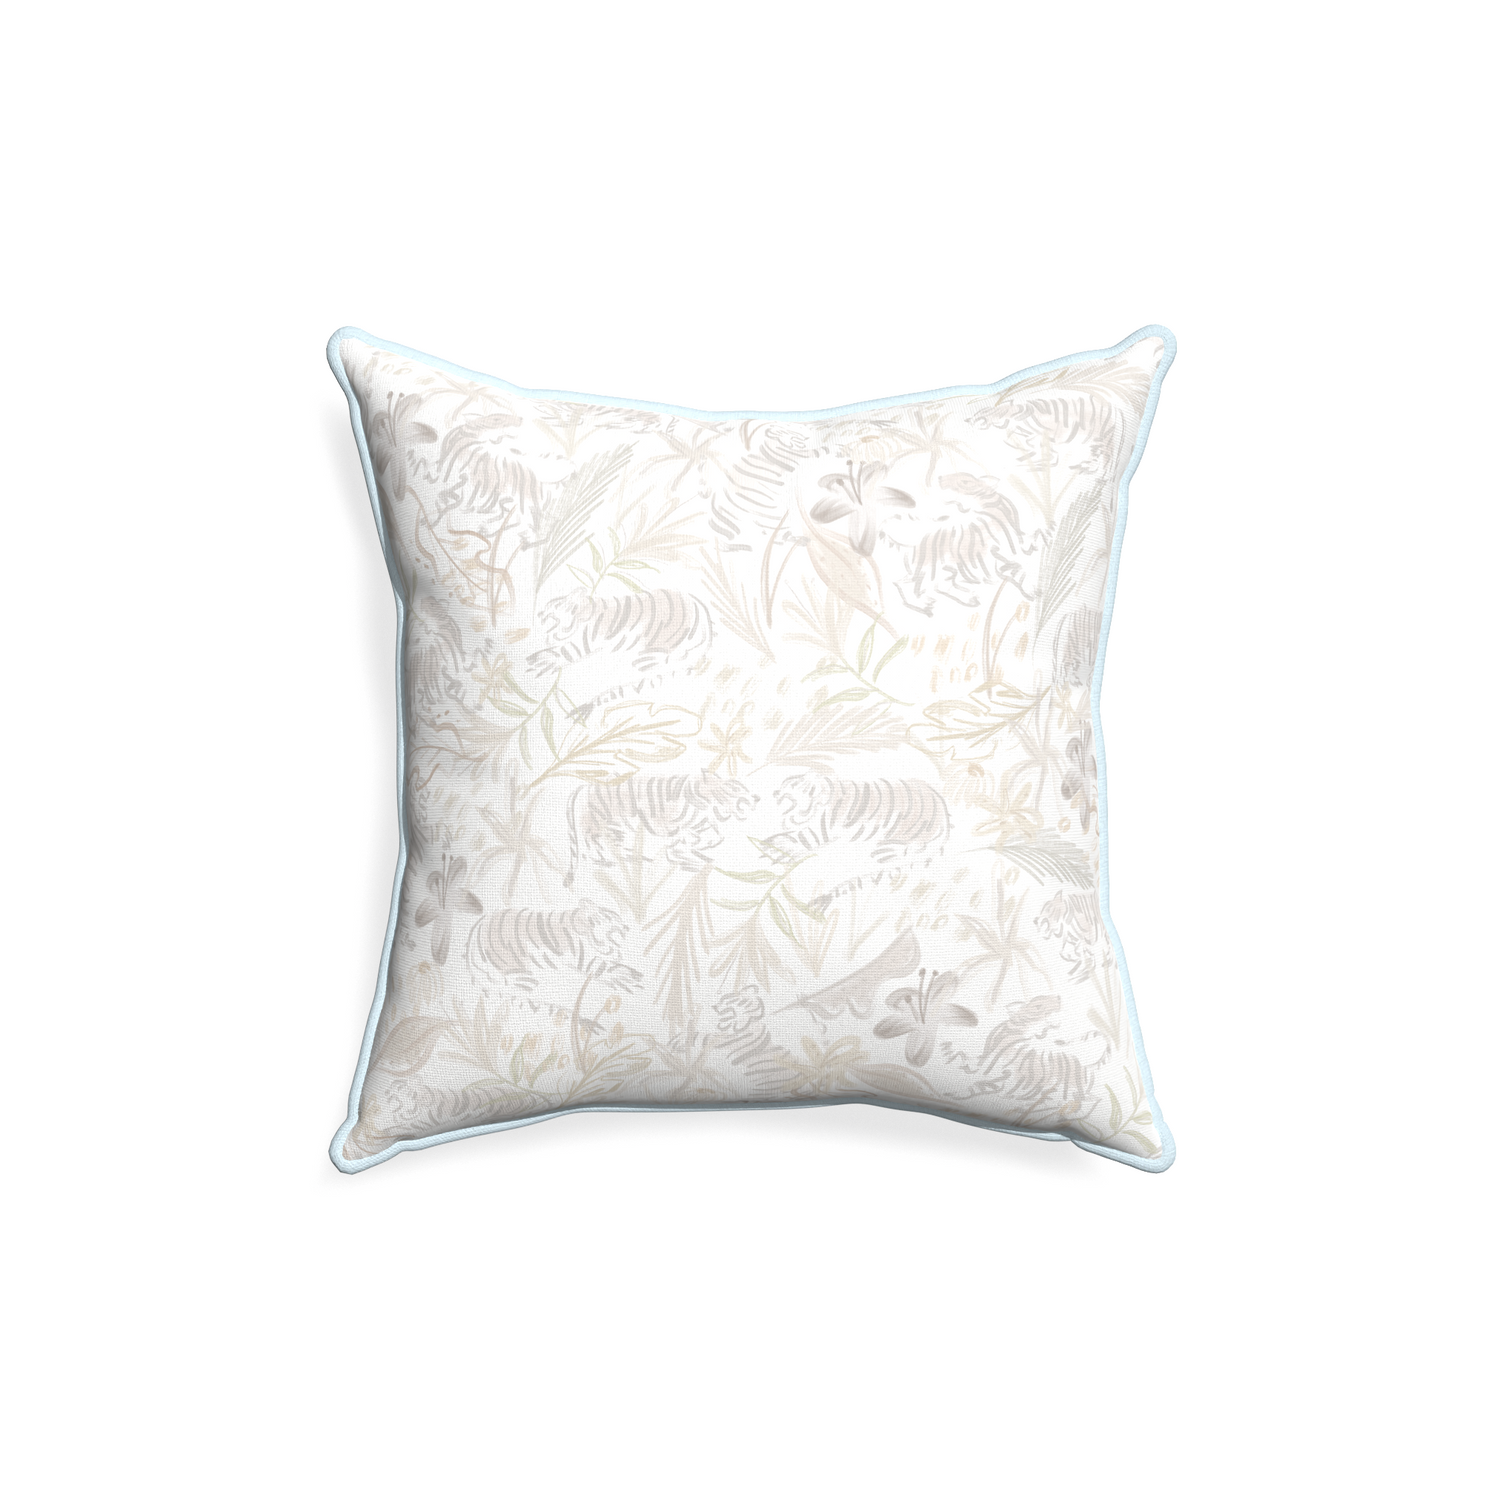 18-square frida sand custom beige chinoiserie tigerpillow with powder piping on white background